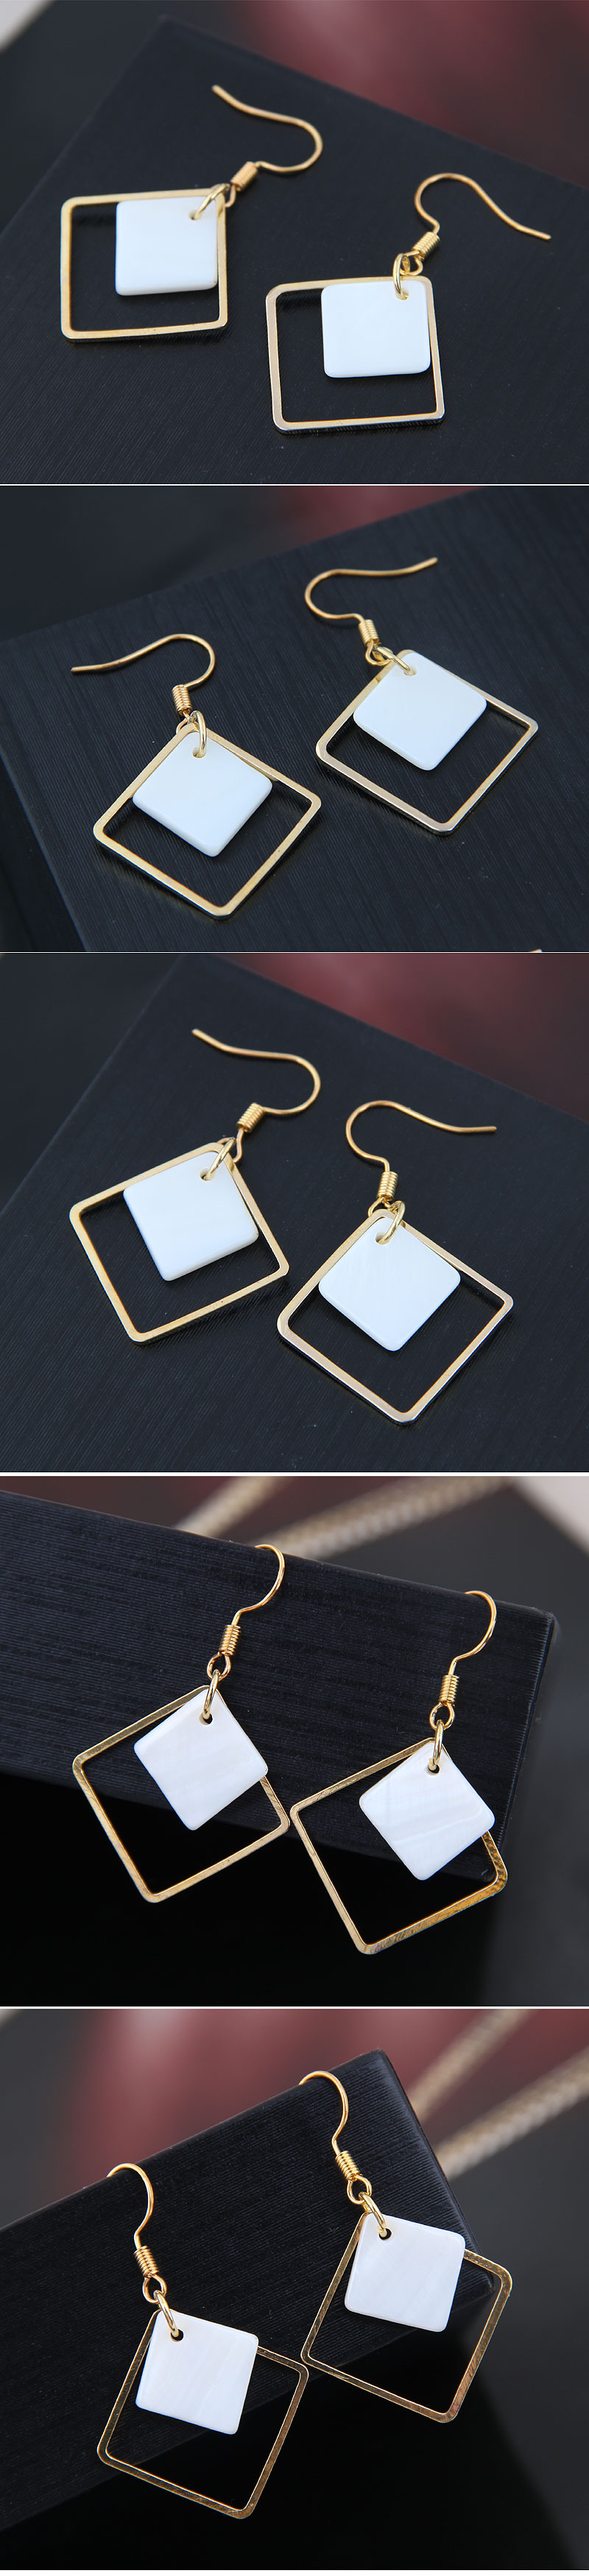 Fashion female earrings simple shell geometric shape personality square earringspicture1